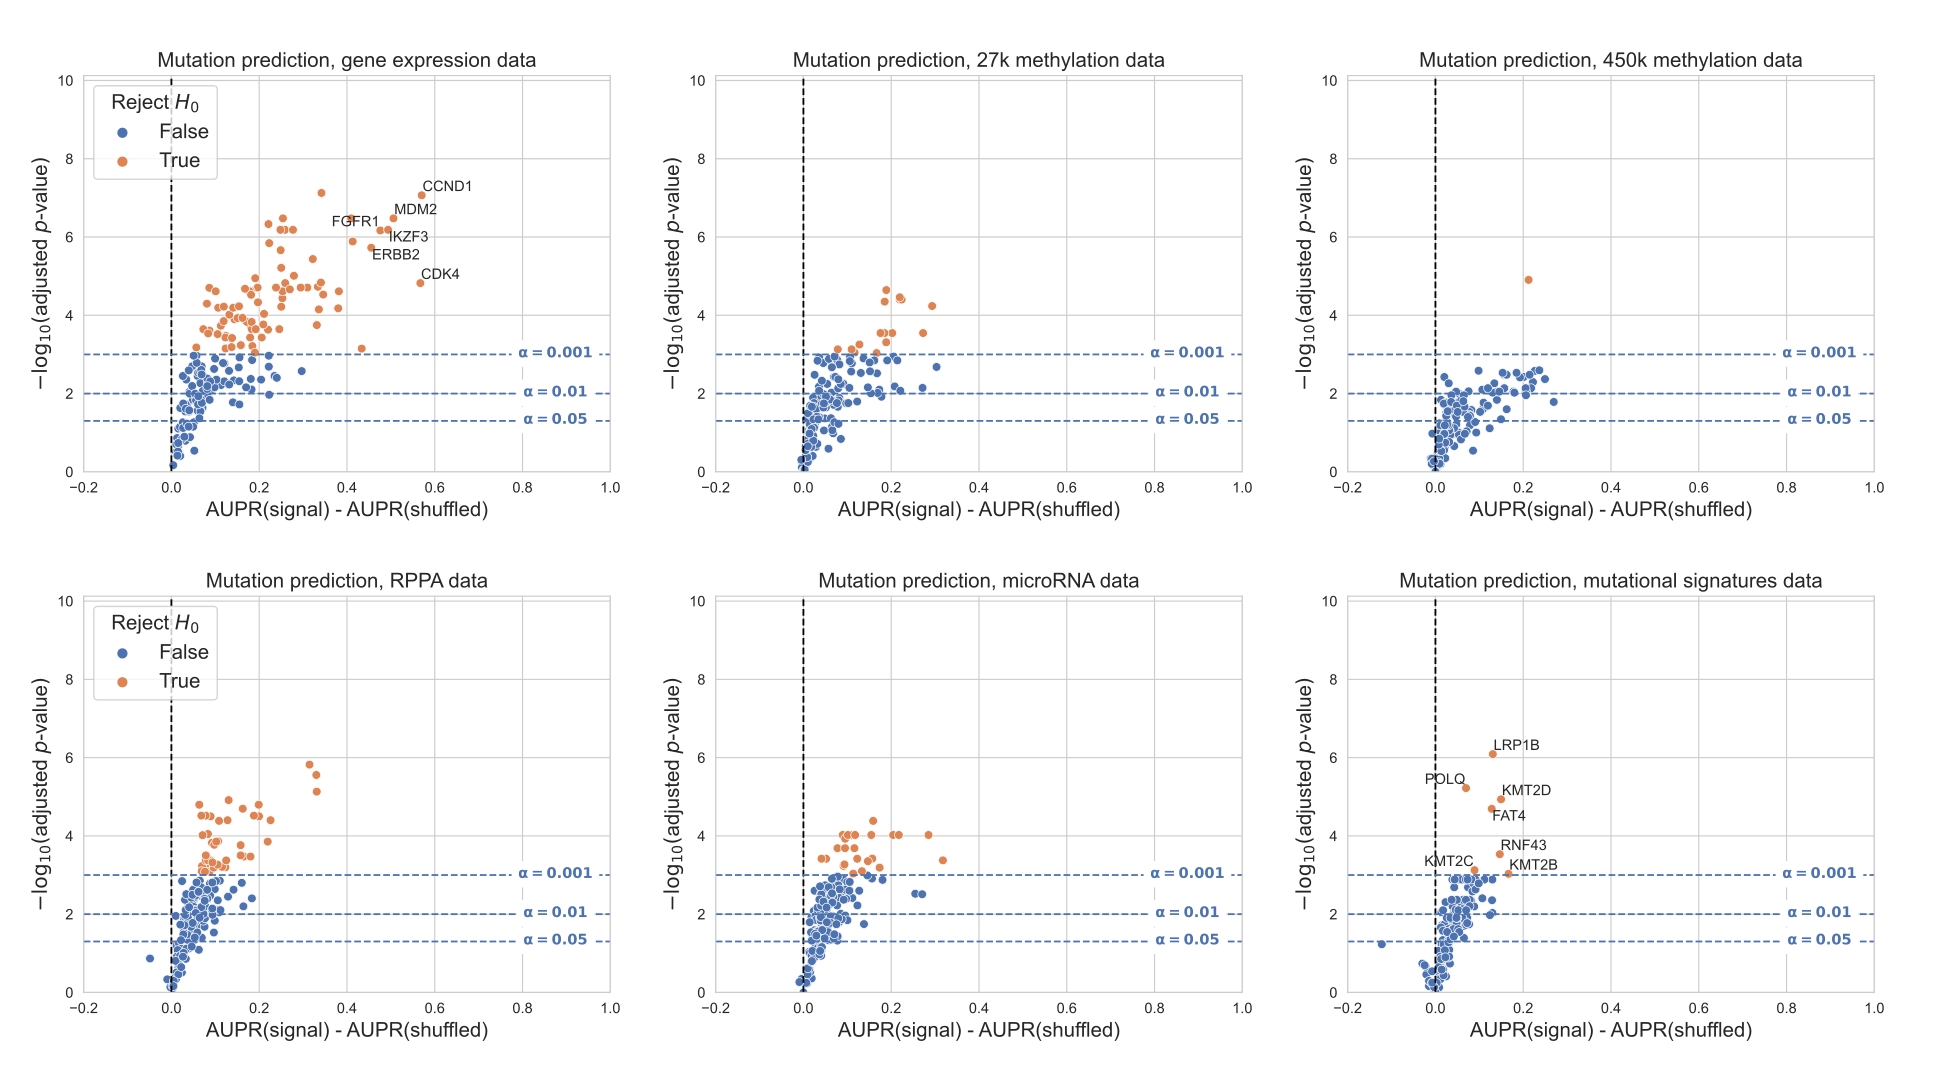 Figure 11: Volcano-like plots showing predictive performance for each gene in the cancer-related gene set for all data types, relative to the permuted baseline model, when genes are filtered based on the entire dataset rather than by cancer type. For this filtering approach, we included/excluded entire genes rather than individual cancer types: specifically, we trained a classifier for each gene where all cancer types combined had at least 5% mutated samples and at least 100 total mutated samples, resulting in 182 total classifiers. The x-axis shows the difference in mean AUPR compared with a baseline model trained on permuted labels, and the y-axis shows p-values for a paired t-test comparing cross-validated AUPR values within folds. Counts of genes making the significance threshold of 0.001: gene expression 81/182 (44.5%), 27K methylation 16/182 (8.8%), 450K methylation 1/182 (0.6%), RPPA 41/182 (22.5%), microRNA 25/182 (13.7%), mutational signatures 7/182 (3.9%).